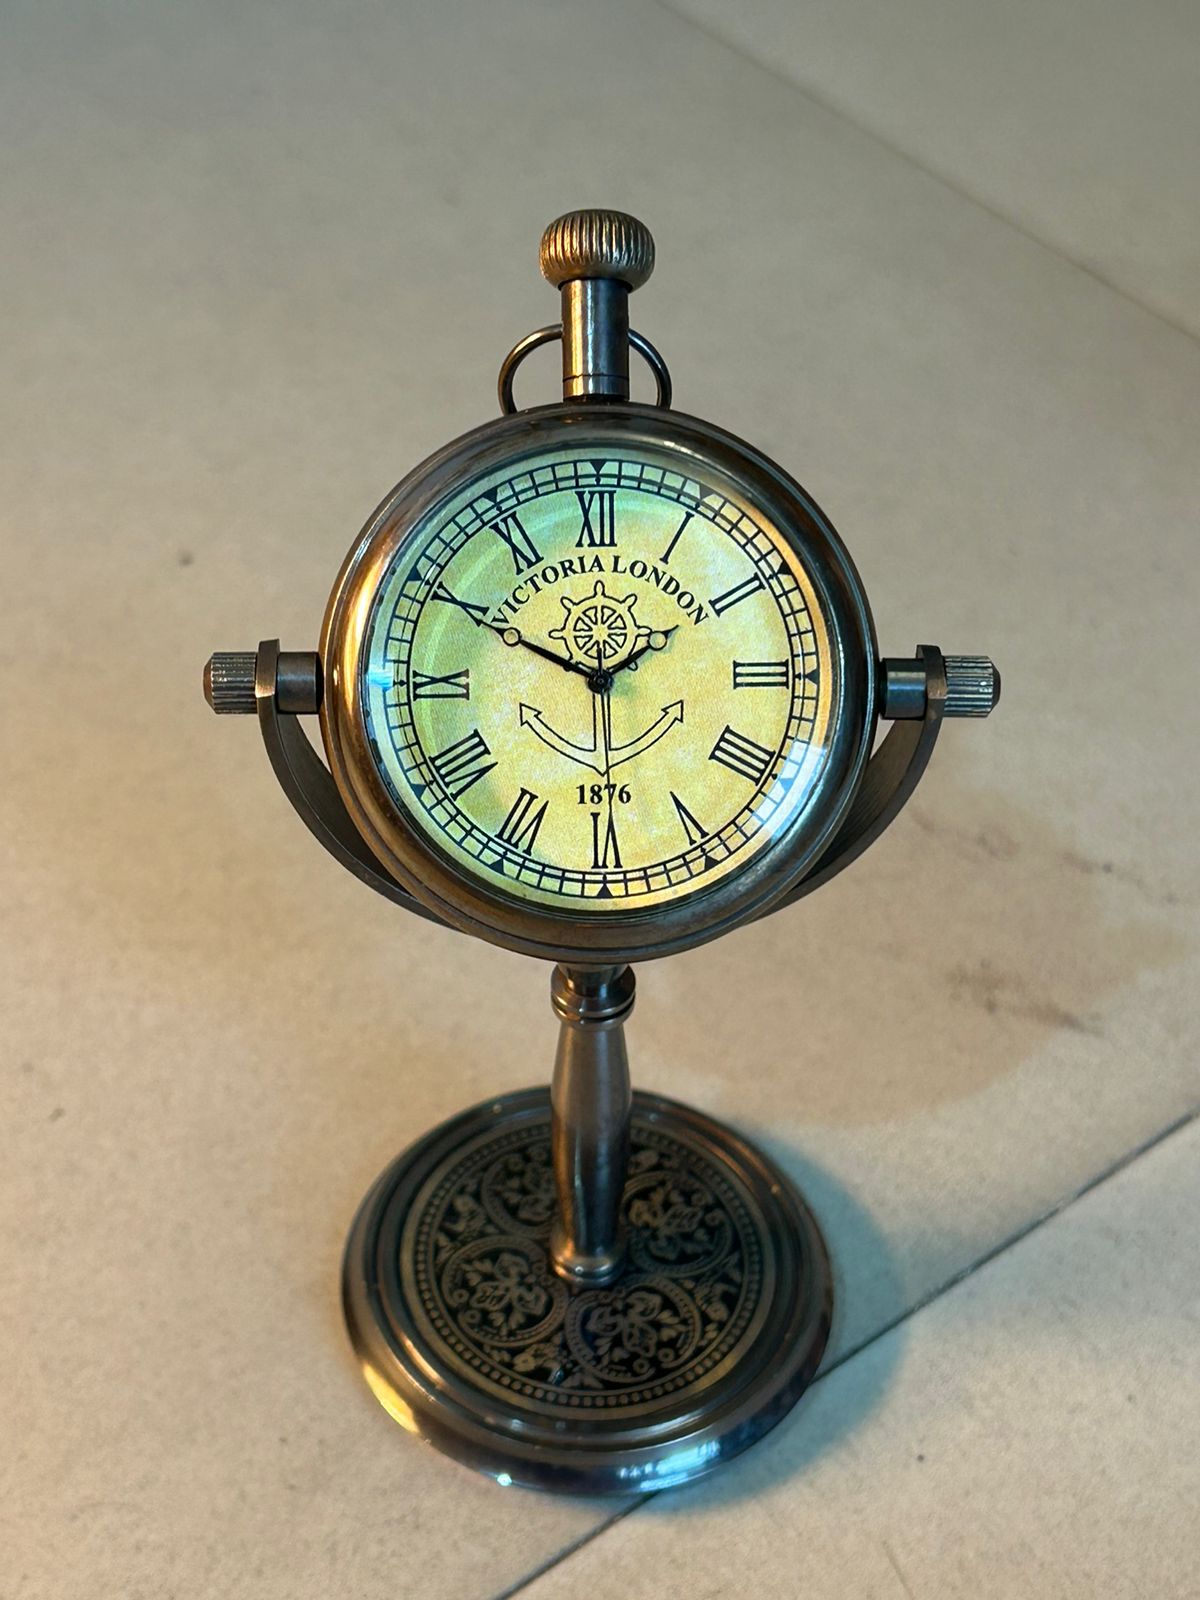 Antique Victoria London Table Clock for Office & Home Decor